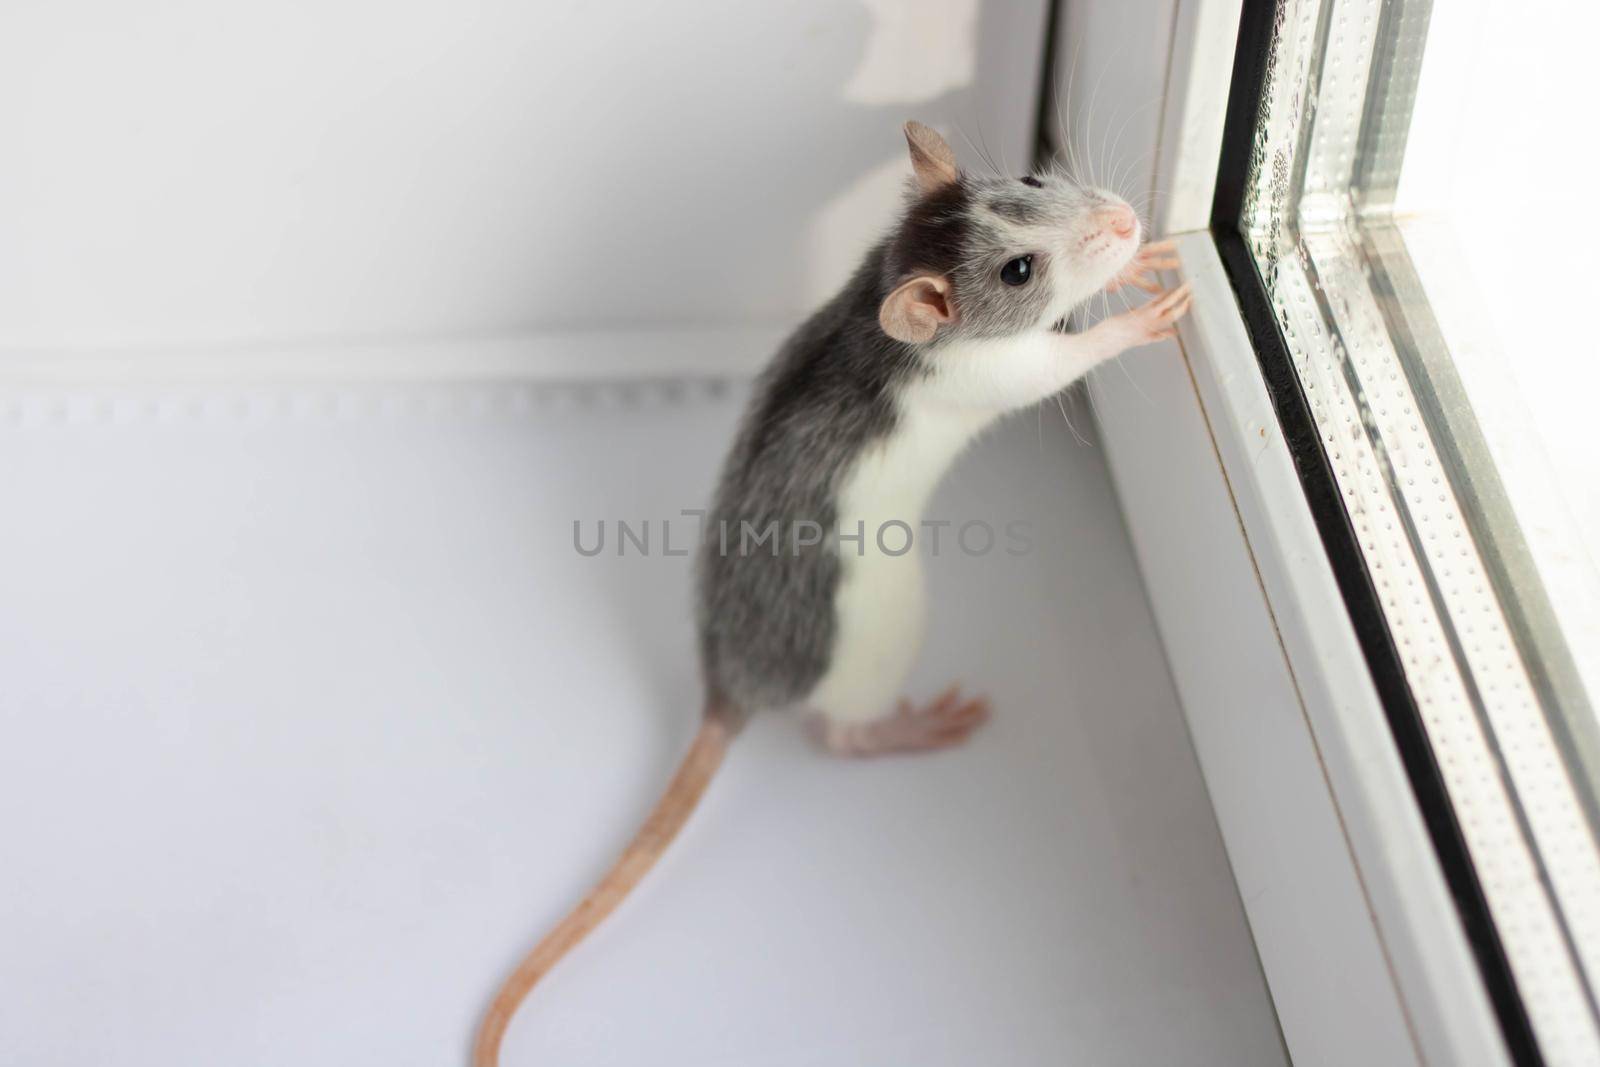 Little fluffy rat - a symbol of 2020 sits on a white background near the window. Year of the rat by horoscope.